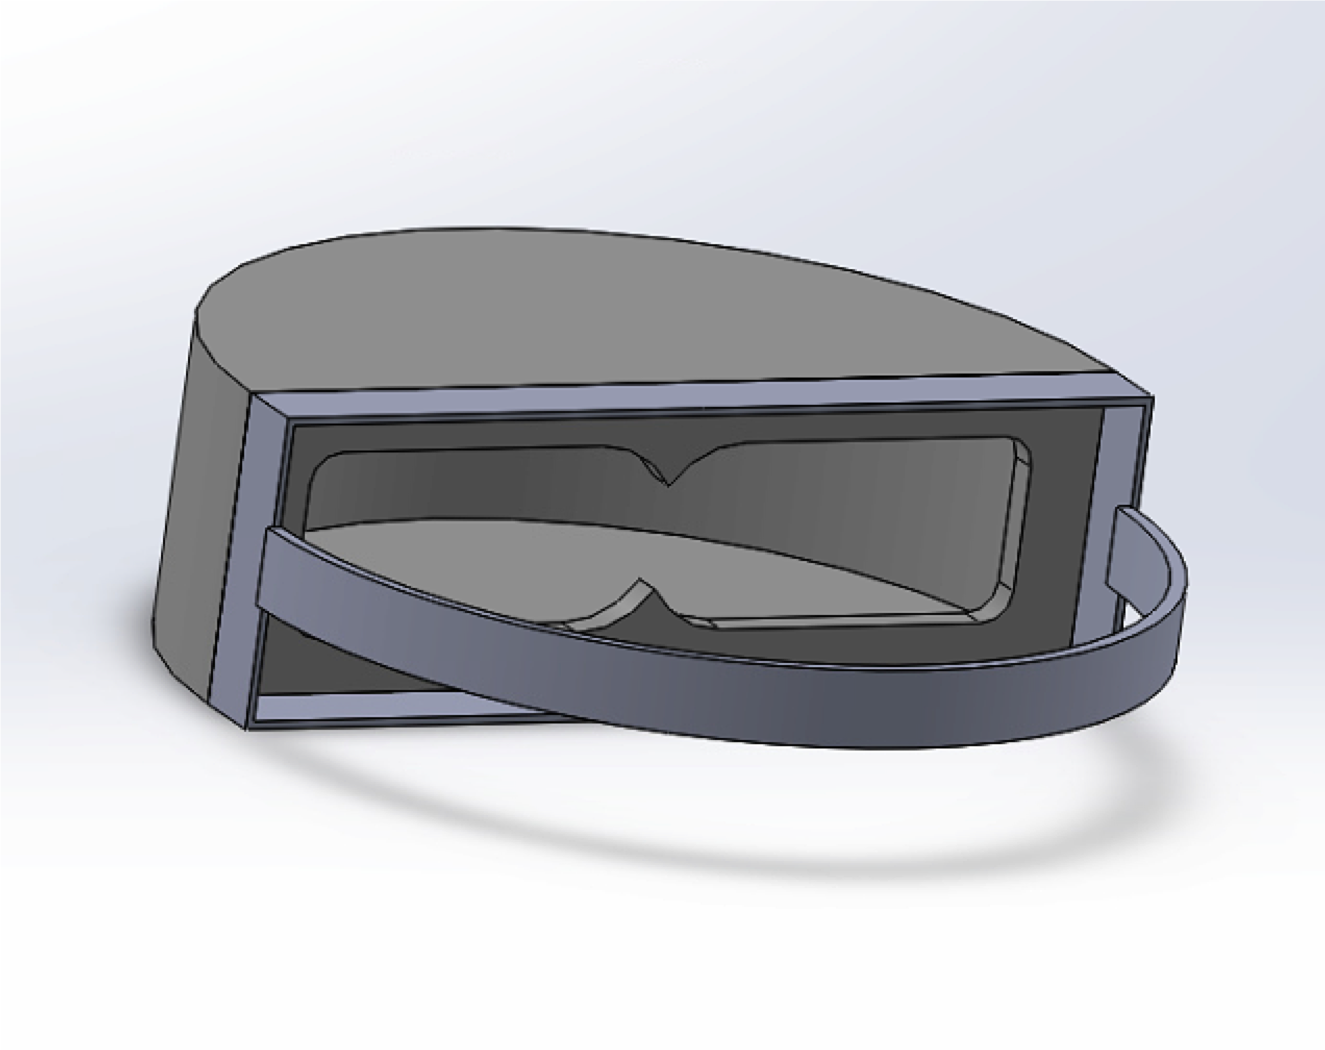 A still photo of a CAD model based on Sophie's second design.